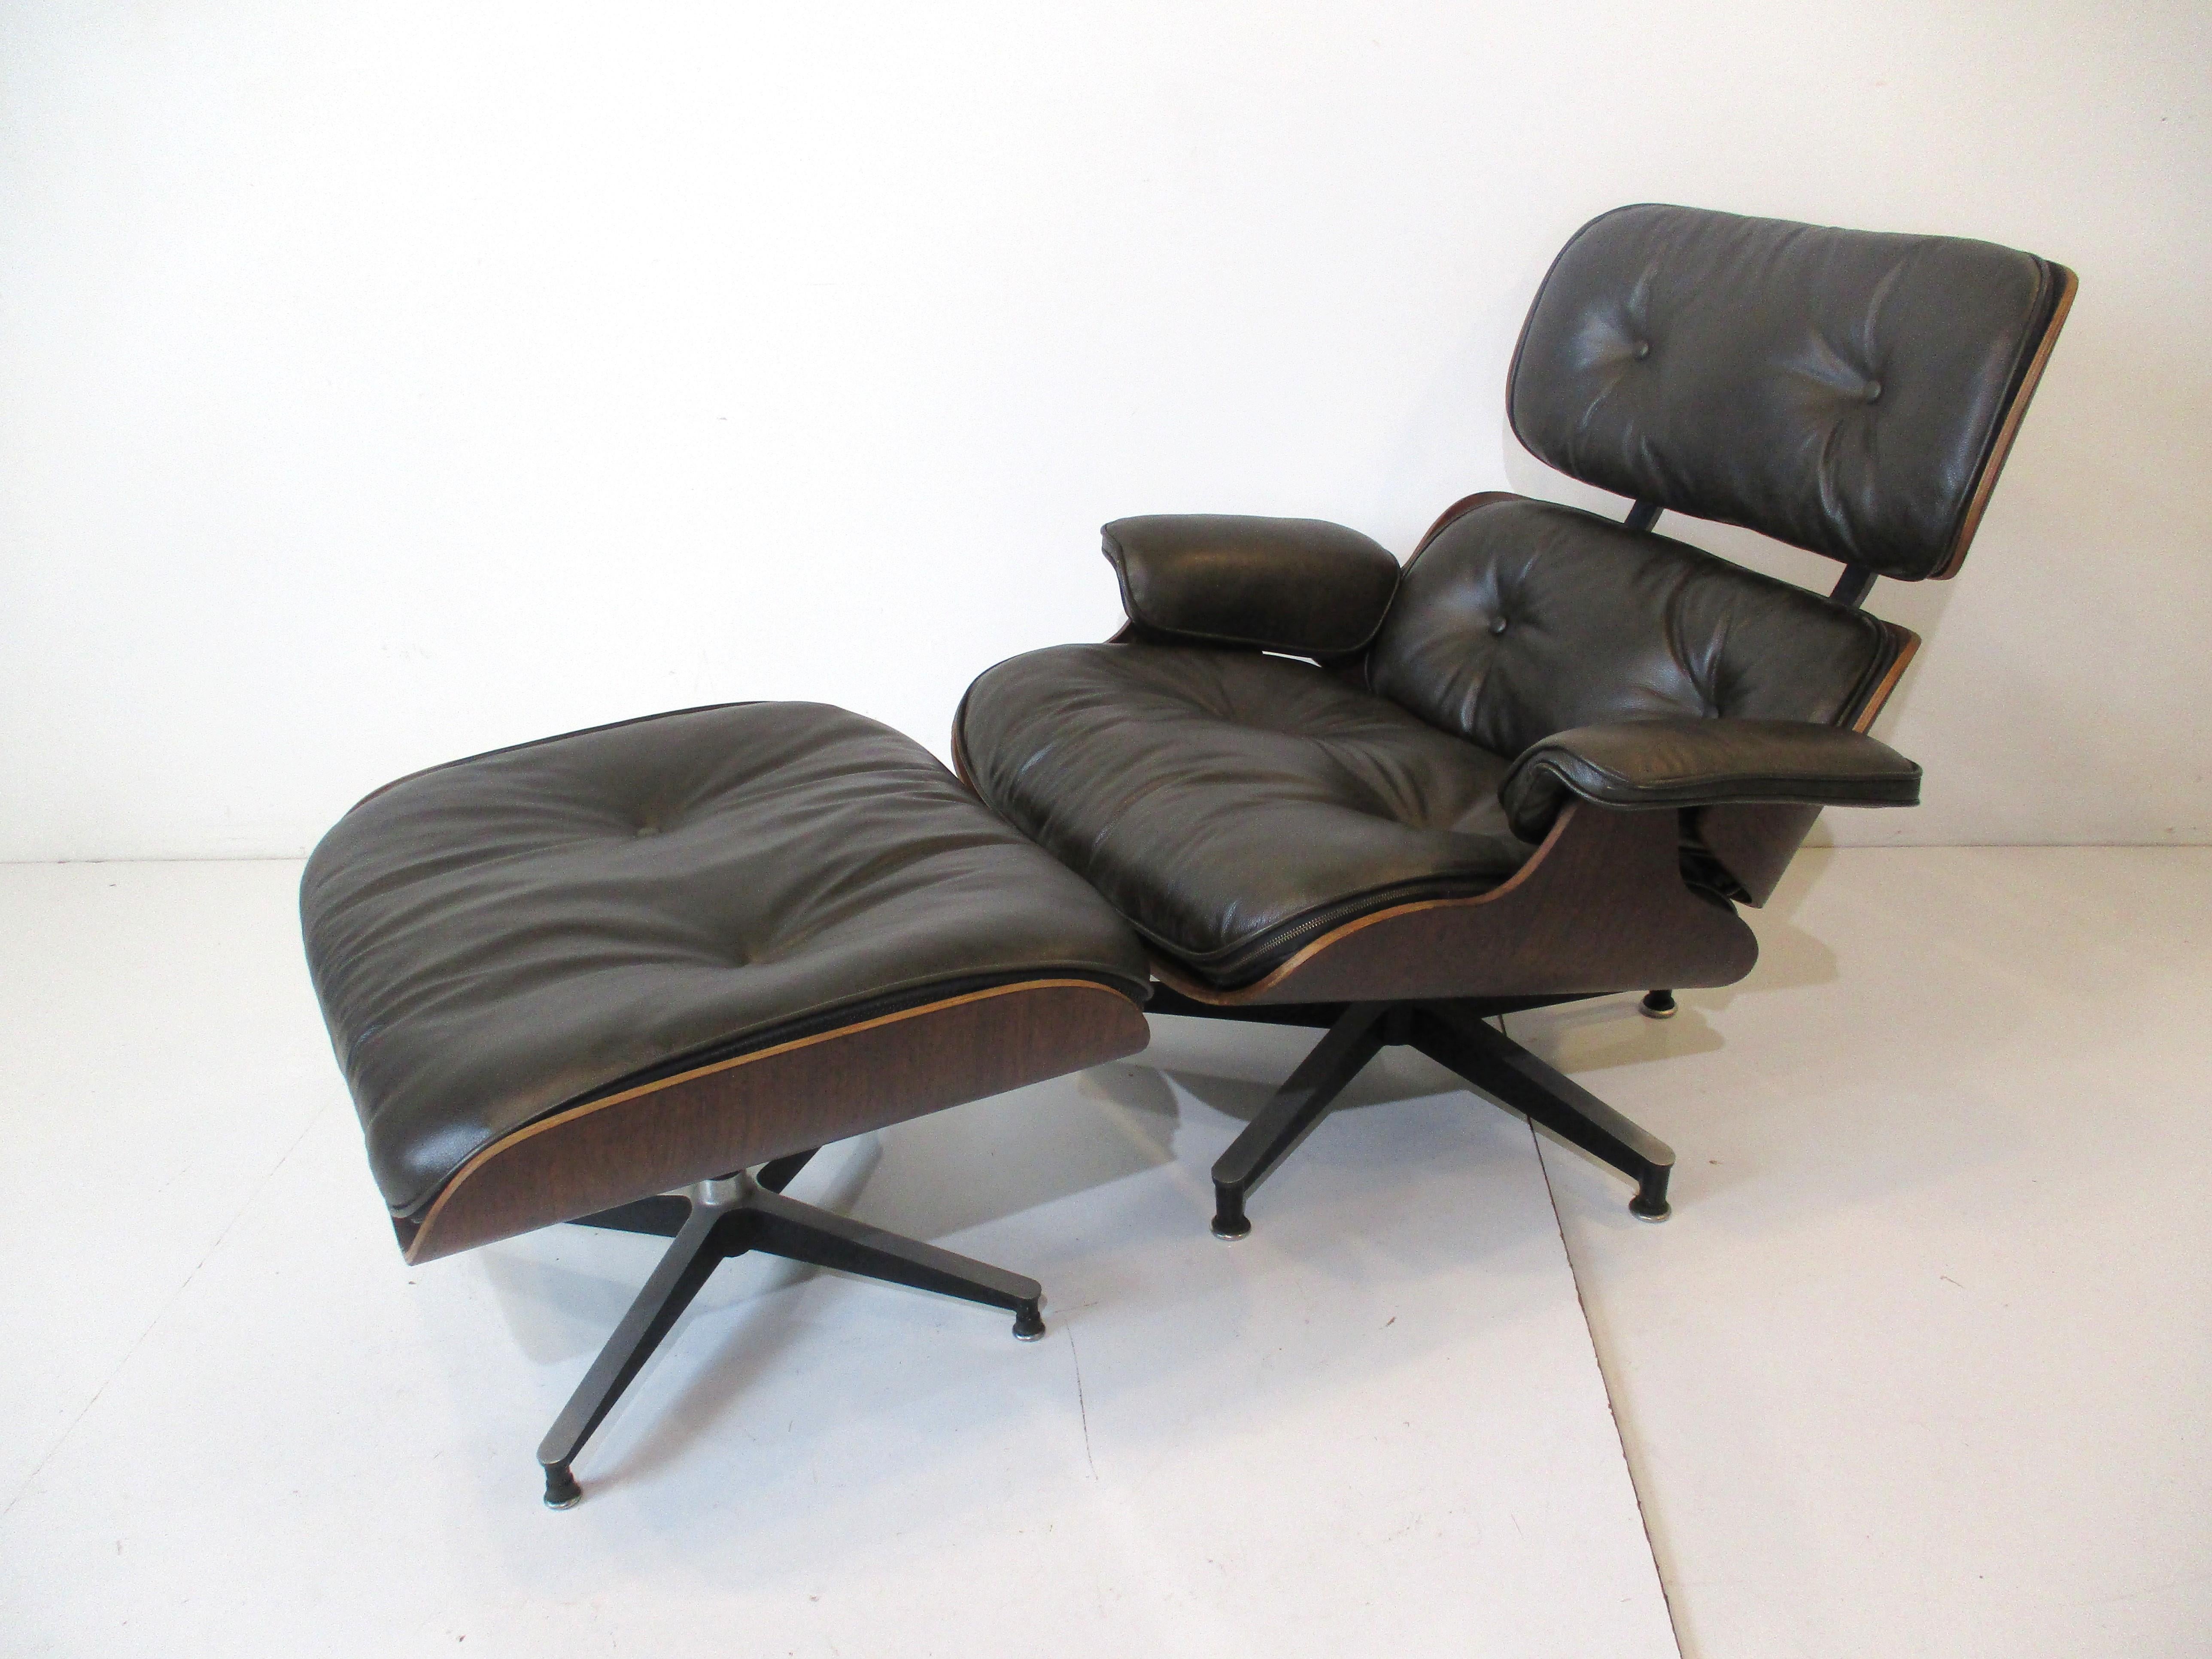 A rare dark green leather Eames 670 lounge chair with matching ottoman in a rich dark Brazilian rosewood. Sittting on cast aluminum star bases with black details this is the icon in Mid-Century design and comfort, retains the manufactures tags to